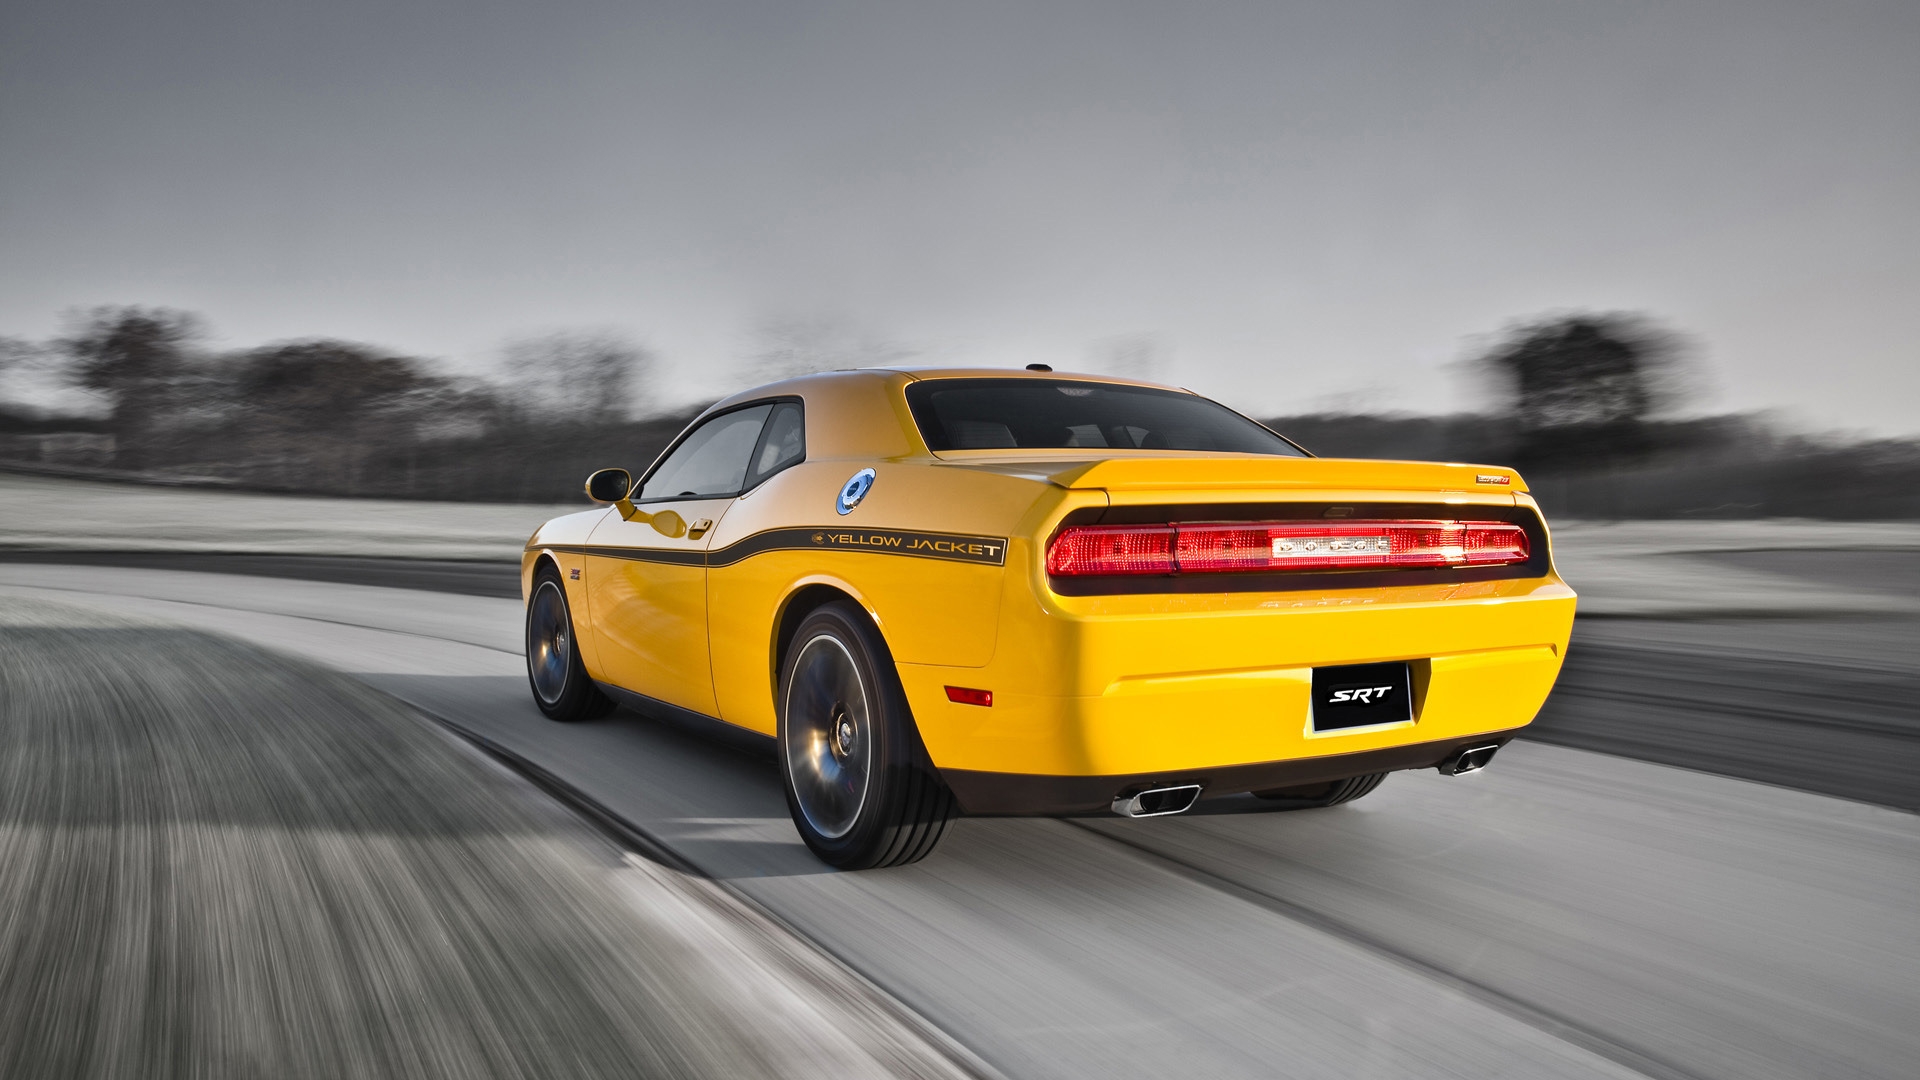 Dodge Challenger Yellow Jacket for 1920 x 1080 HDTV 1080p resolution